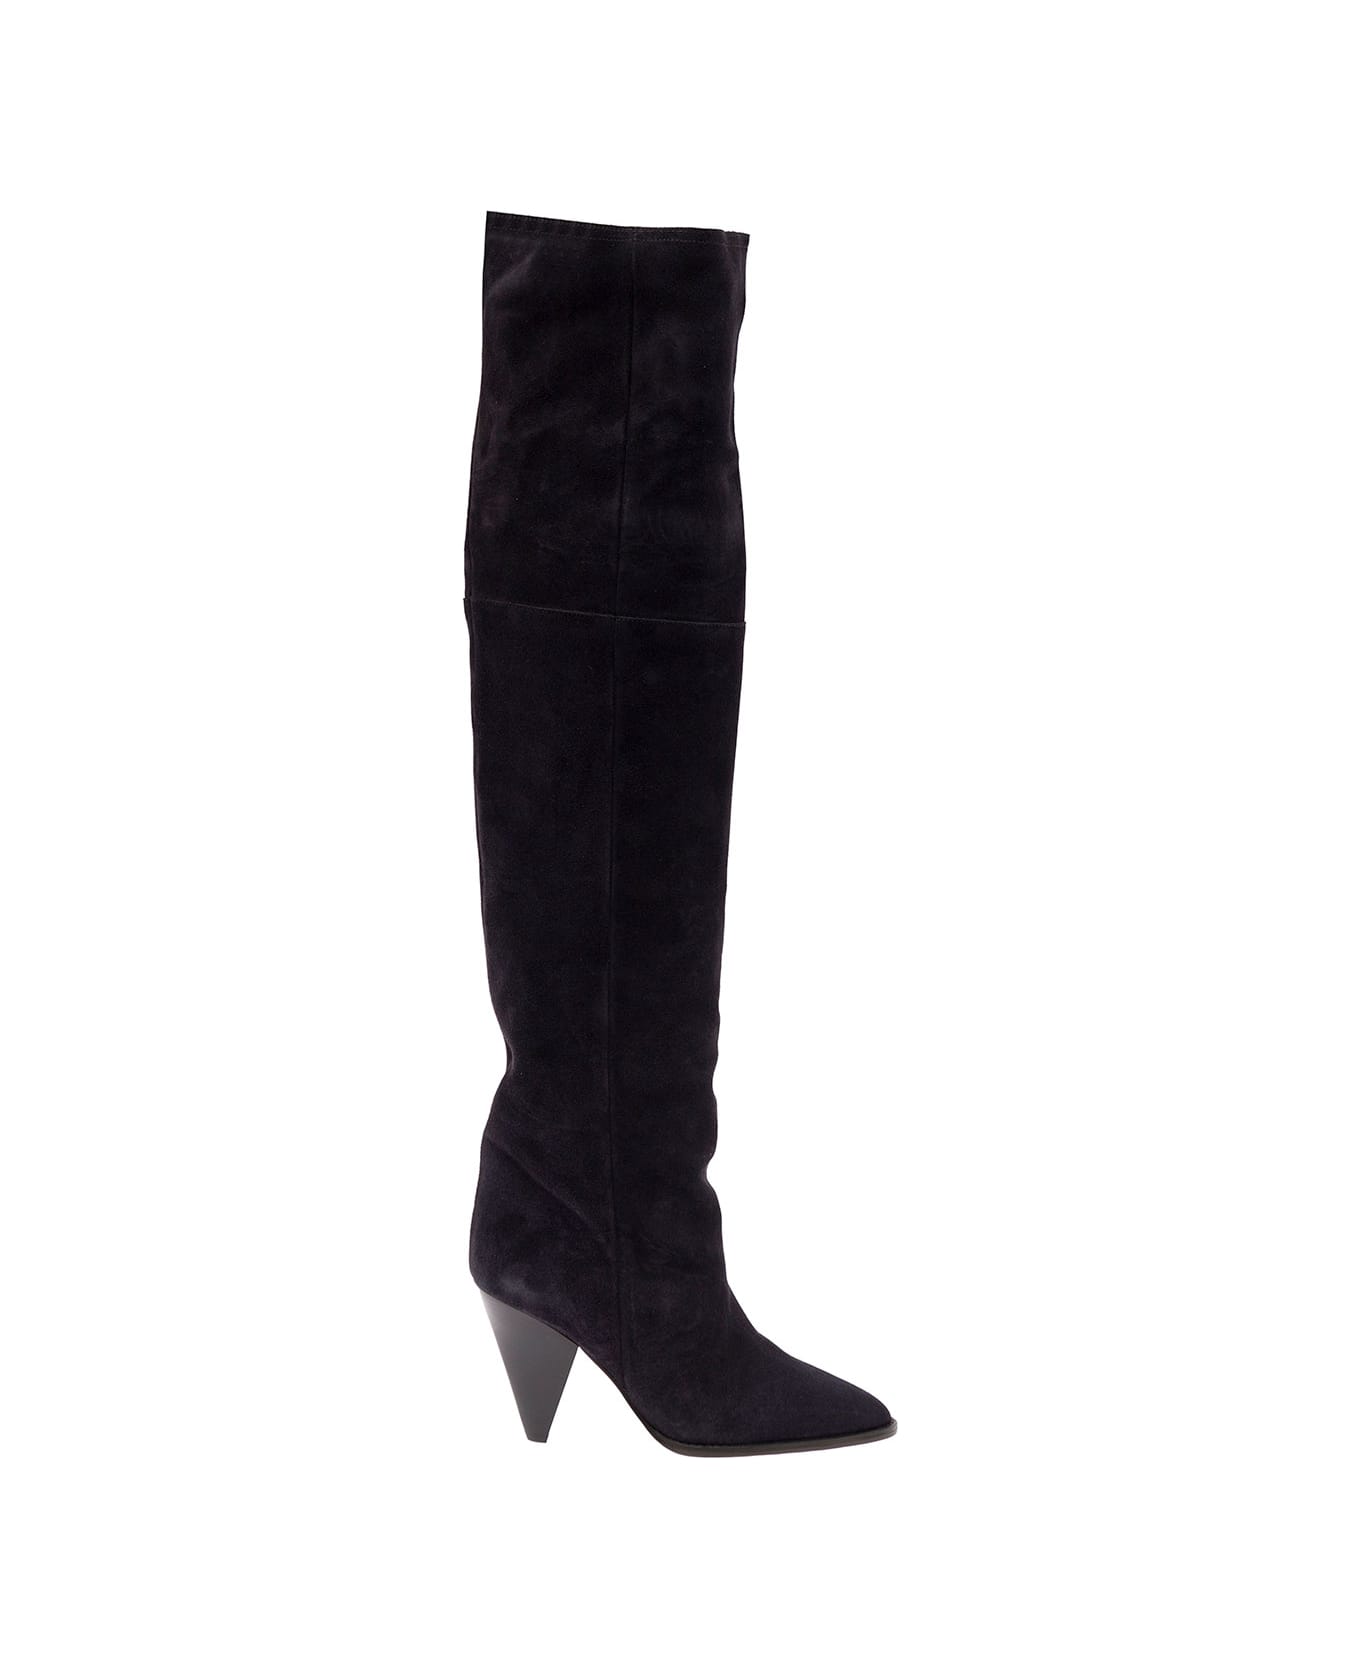 Isabel Marant Riria Black Cuissardes In Suede With Conical Heel Woman ブーツ